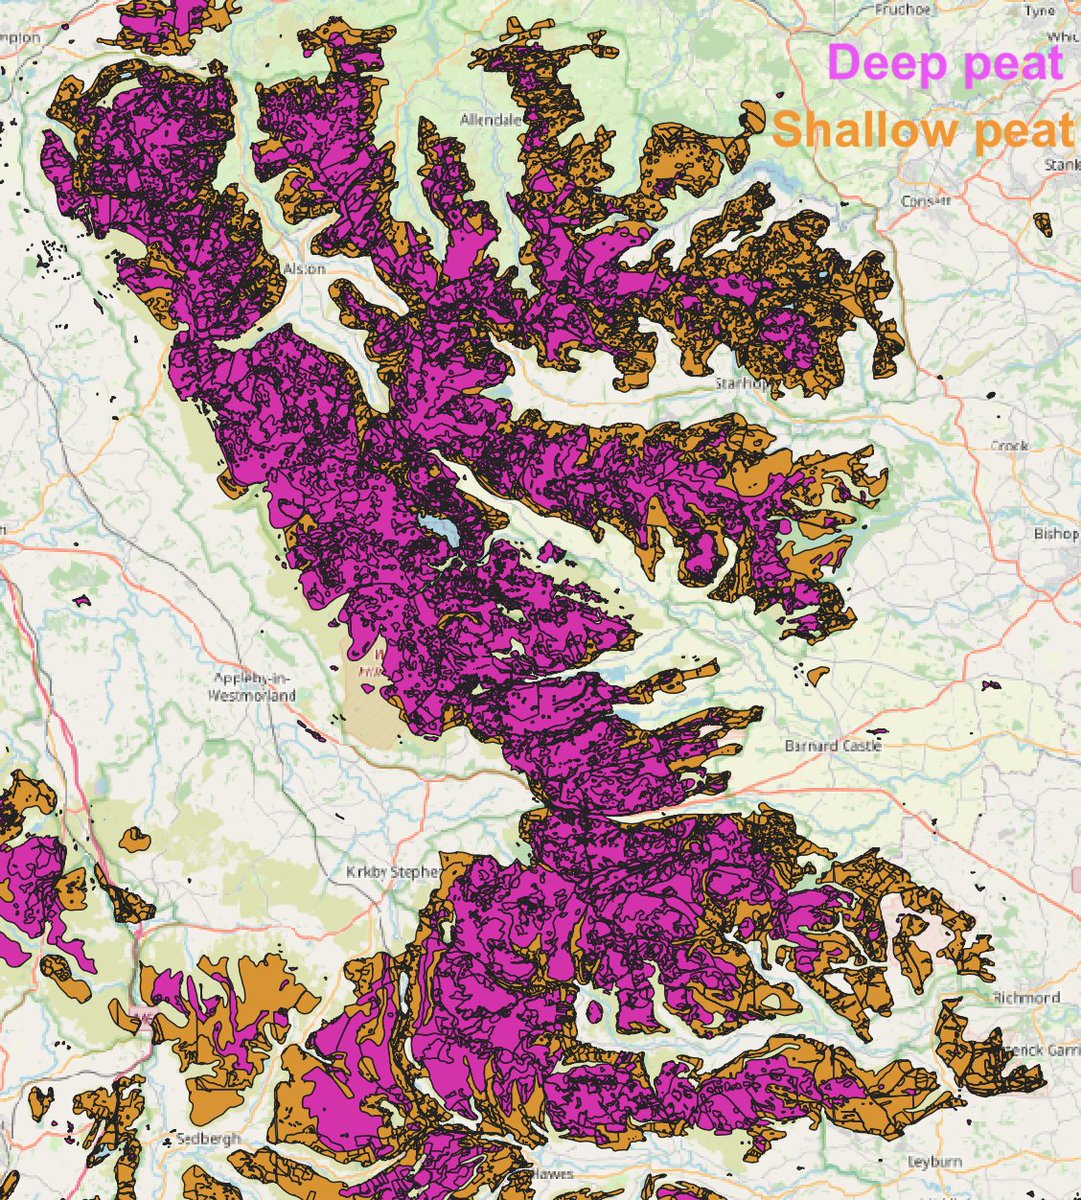 If we look at grouse moors in the North Pennines, Yorkshire Dales, Forest of Bowland, Northumberland and Peak District, we can see that most of them are on areas of deep peat. Here's the North Pennines, for e.g.: (6/10)